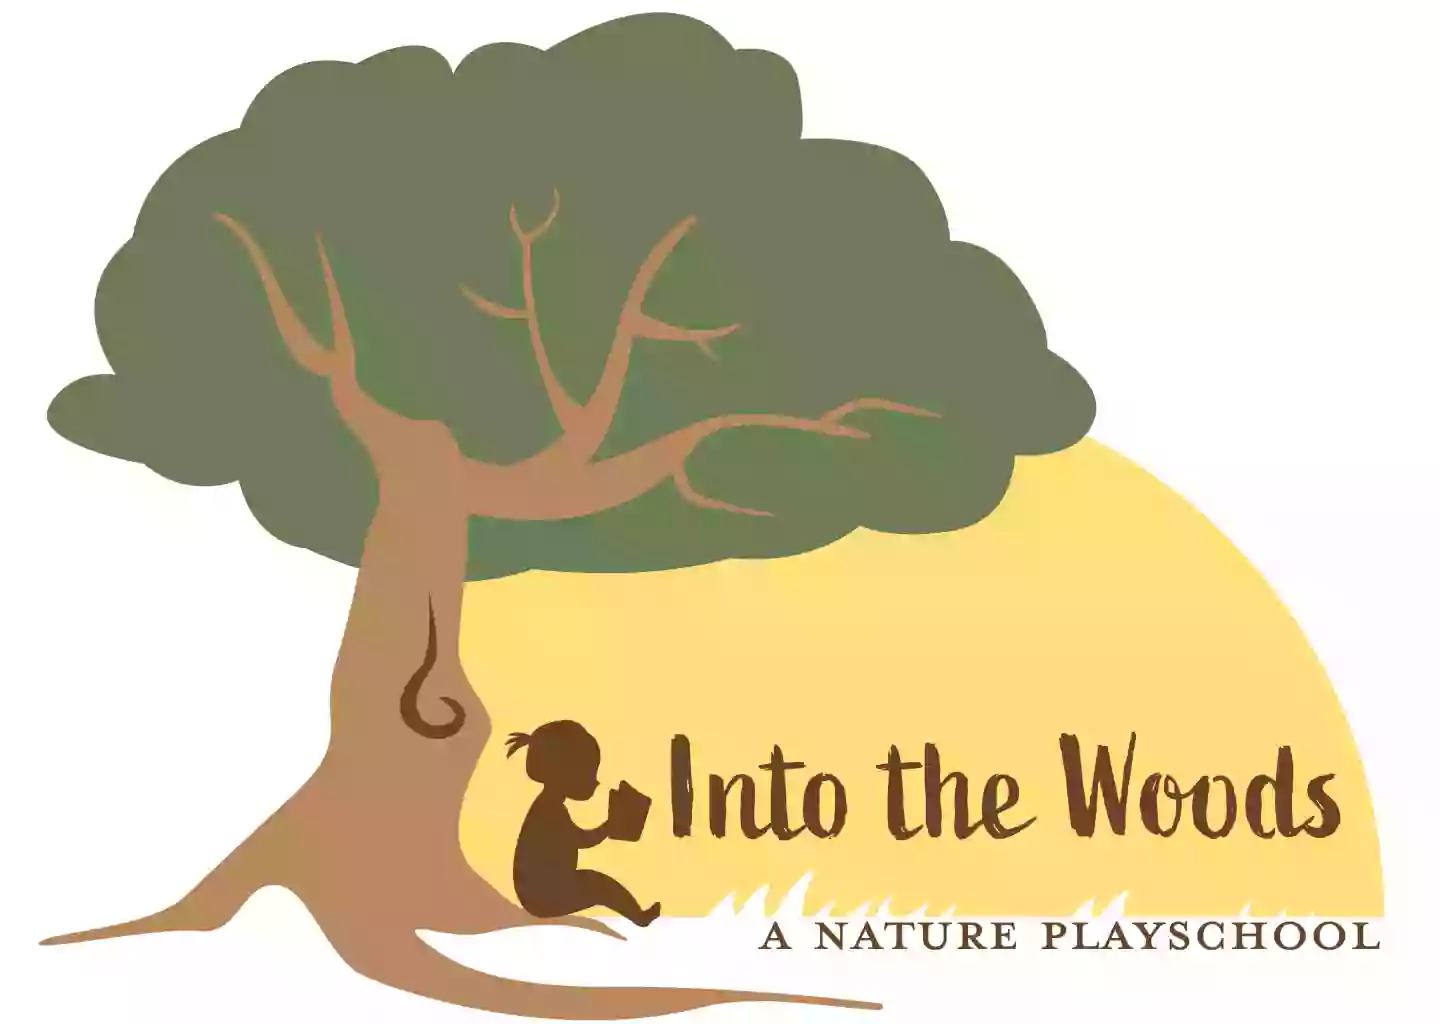 Into the Woods, A Nature Playschool